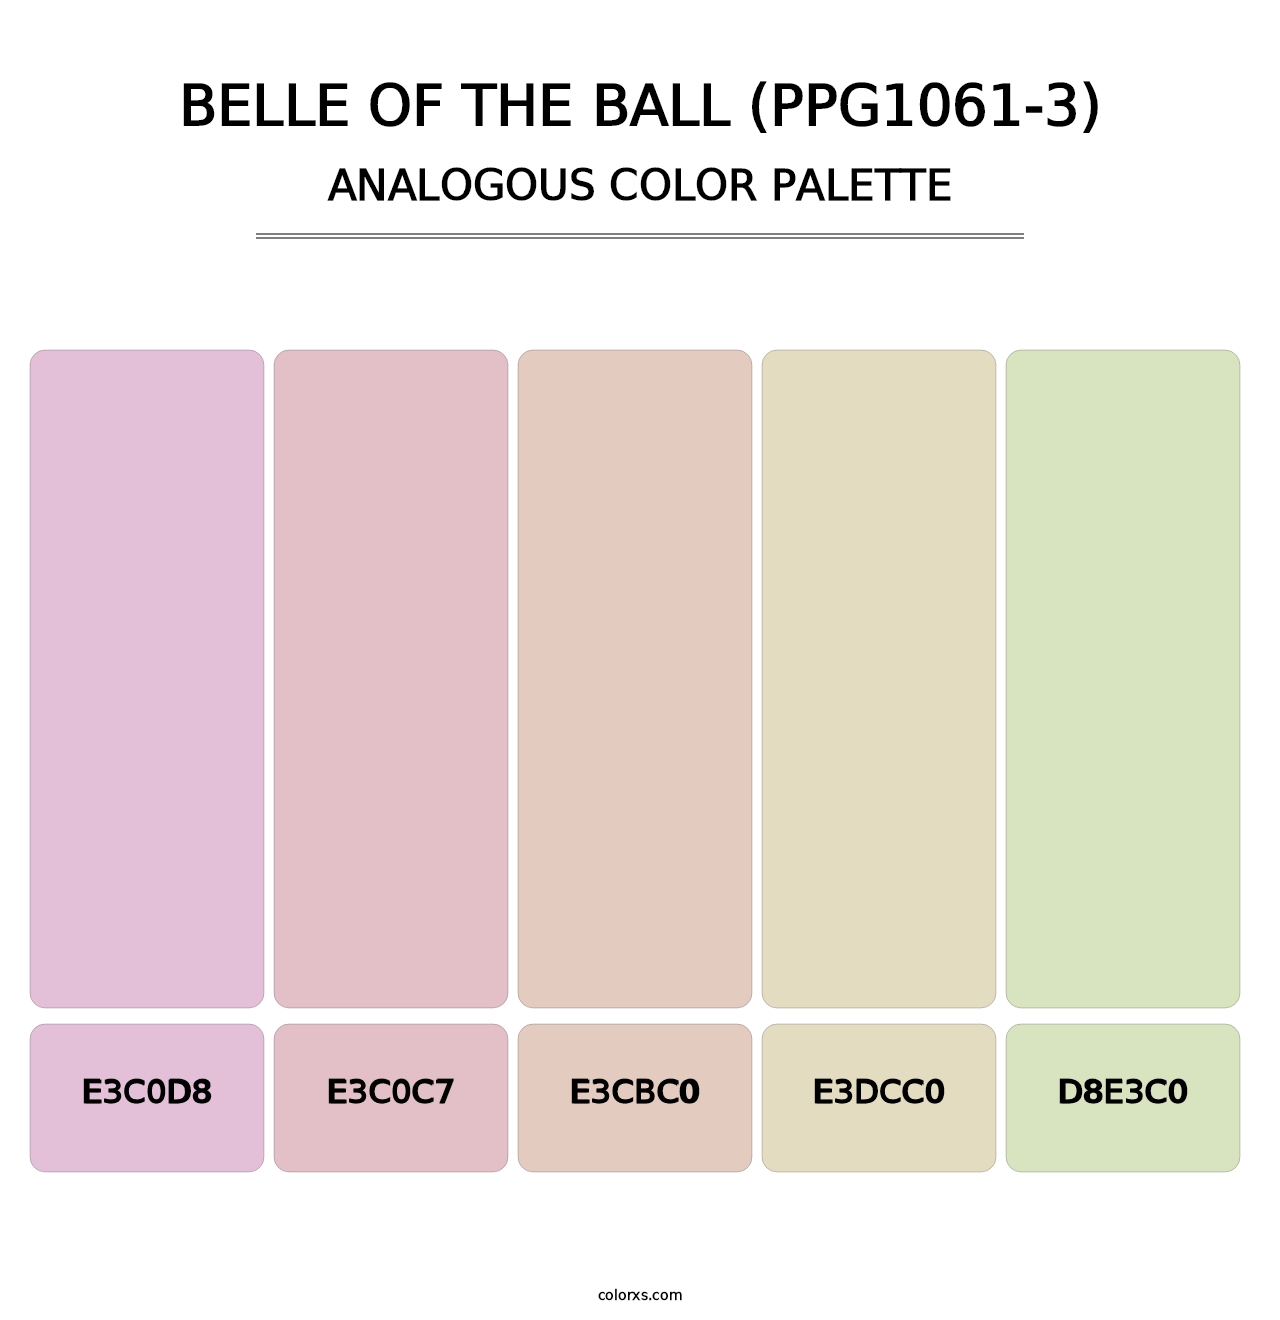 Belle Of The Ball (PPG1061-3) - Analogous Color Palette